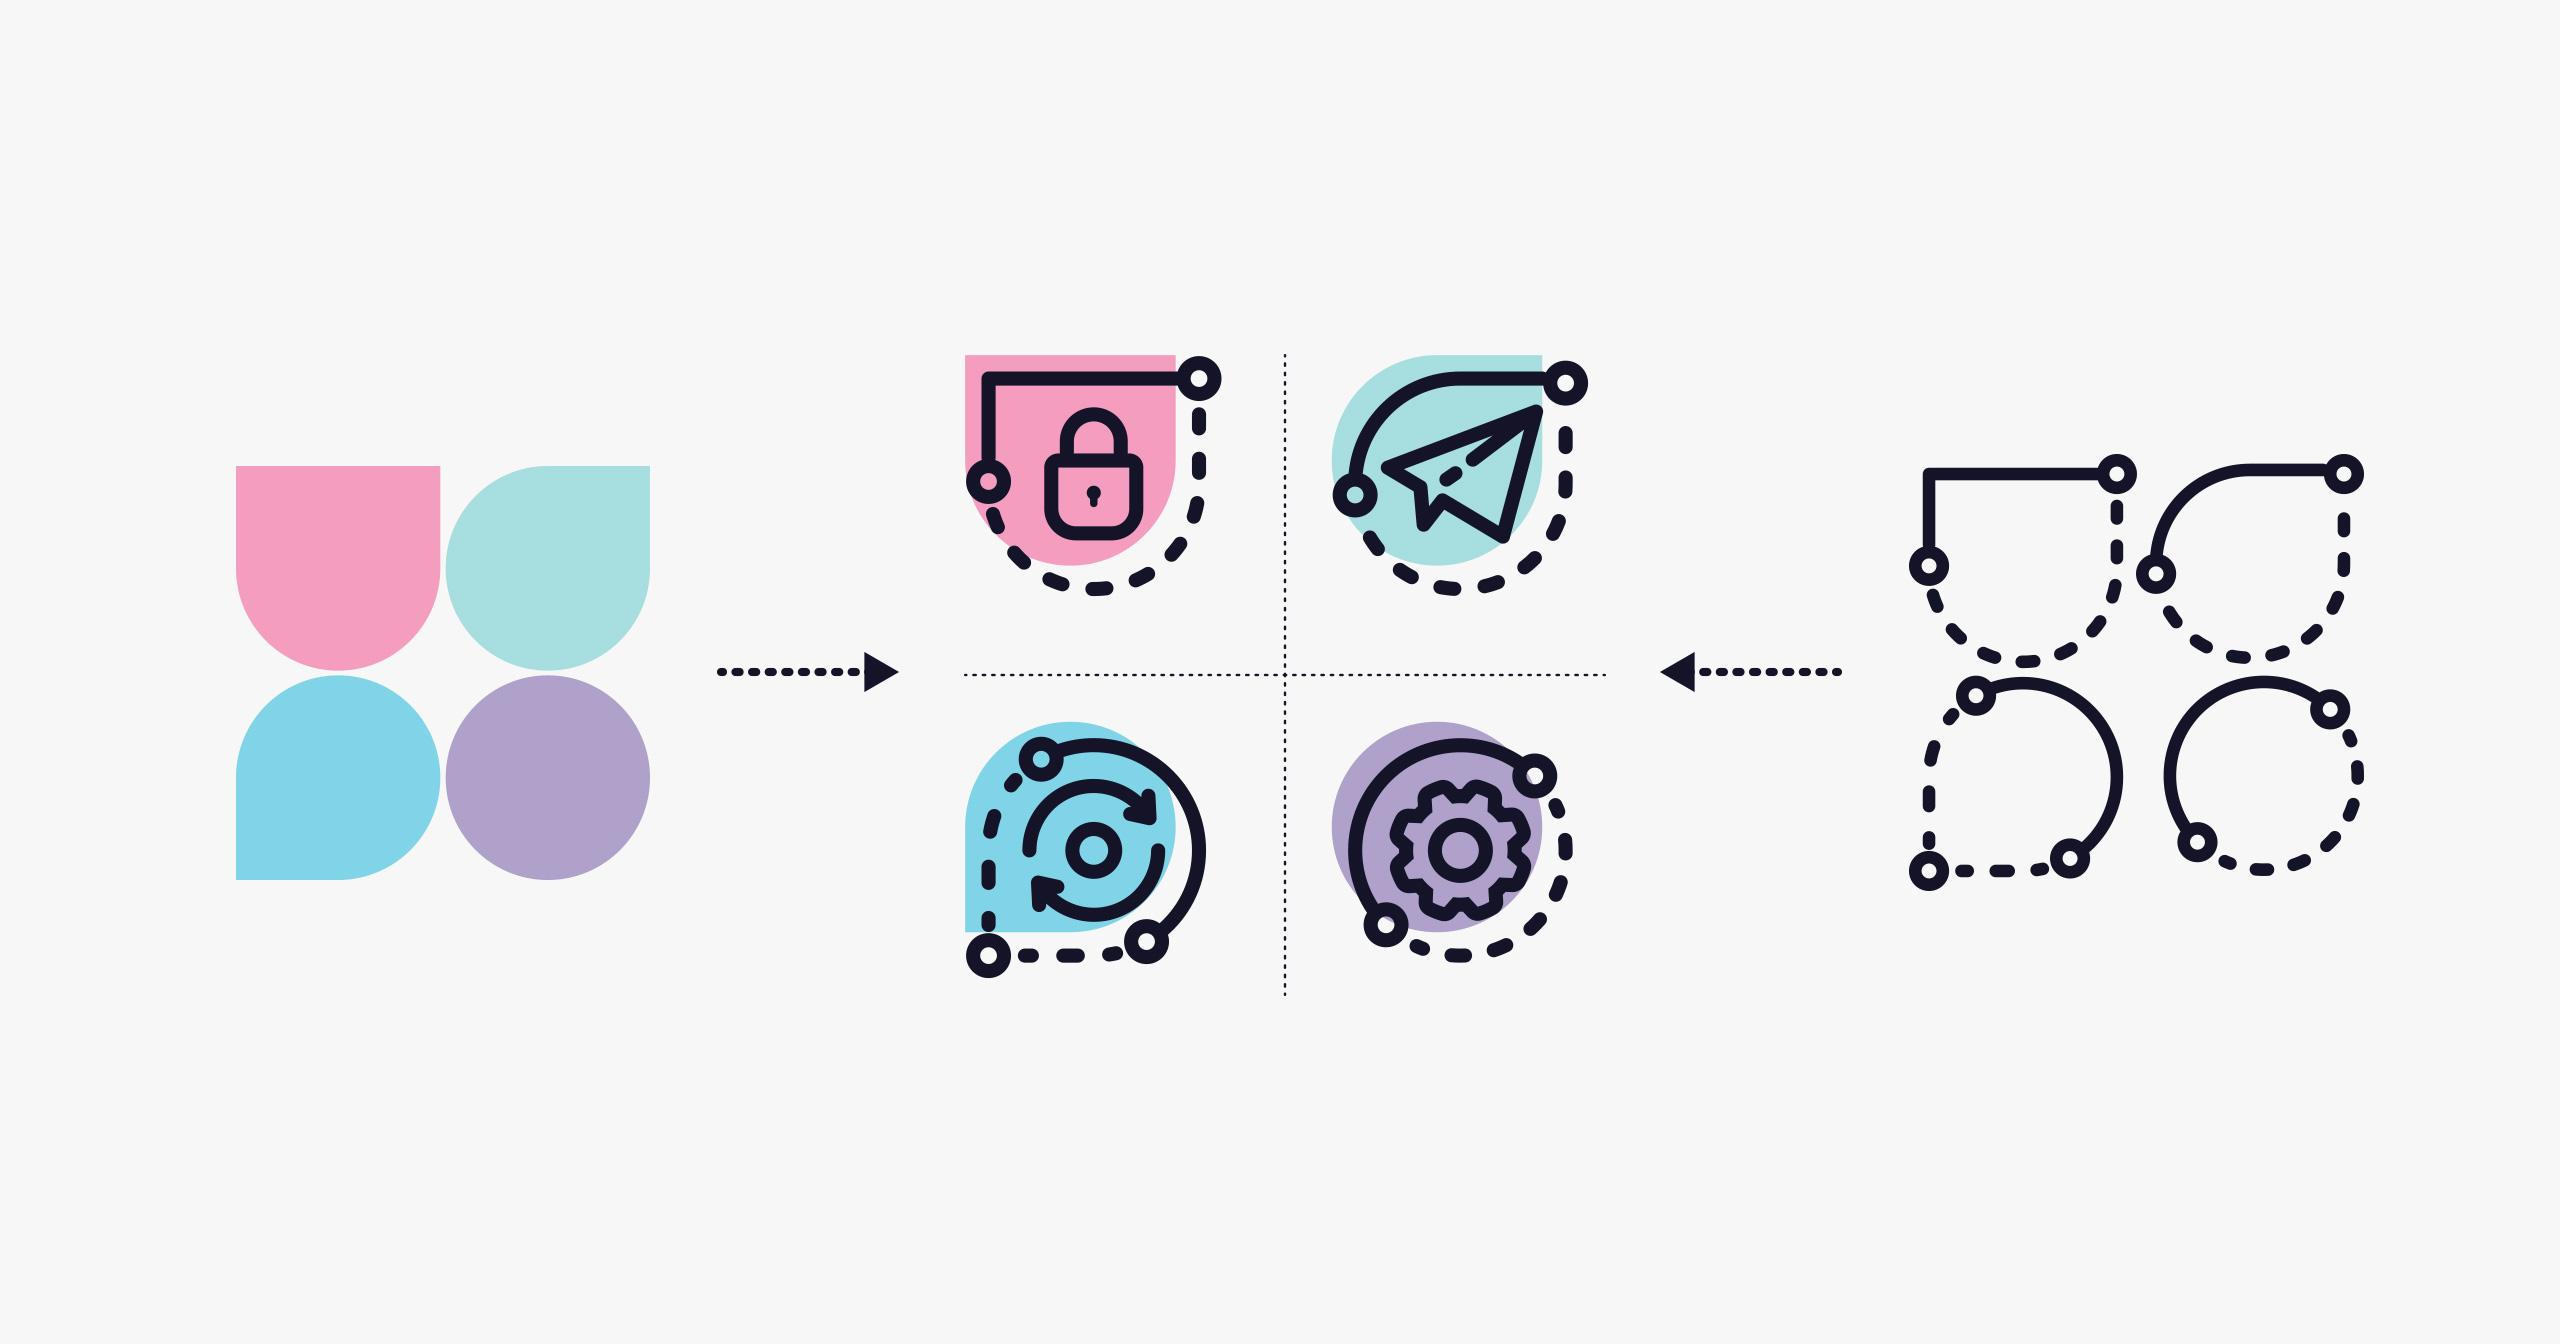 Conceptual icon design process for VCG’s brand pillars as part of Brand Assets Toolkit